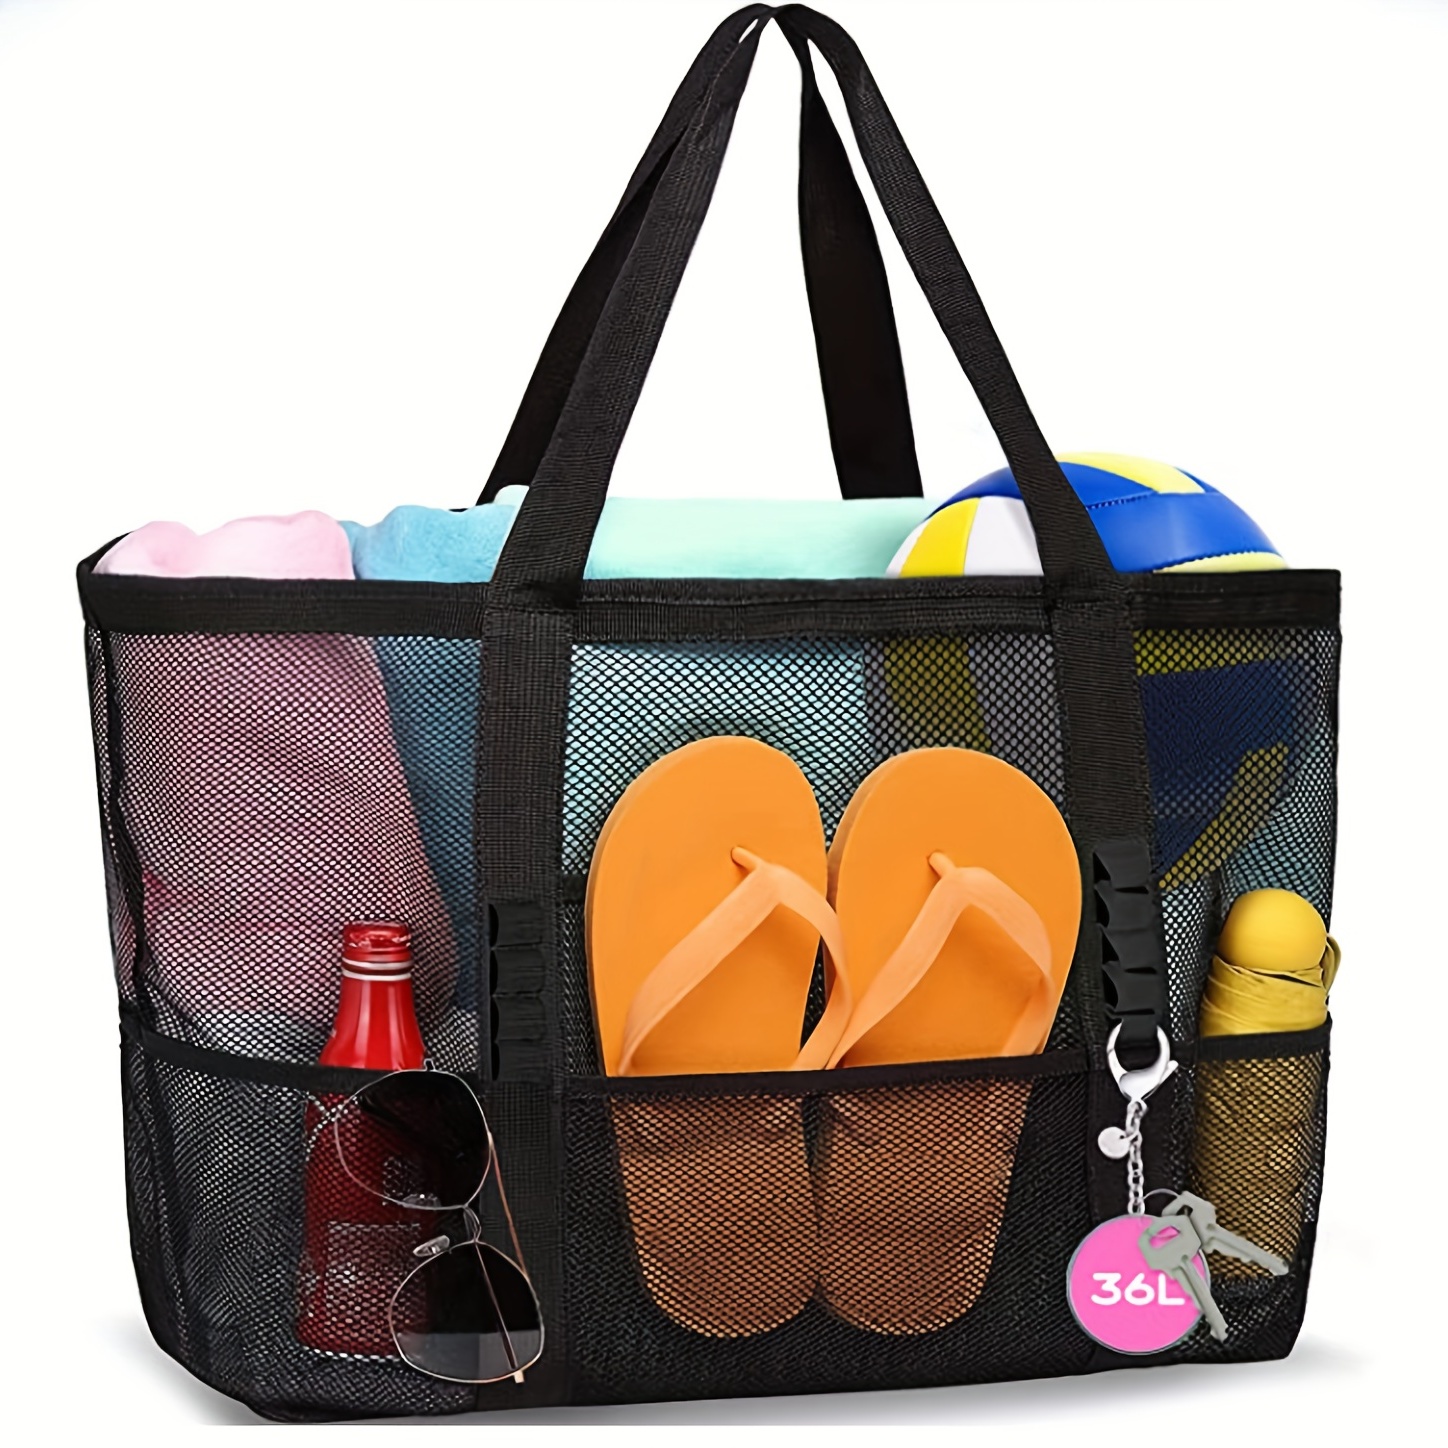 GOTDYA Extra Large Beach Bag, XL Mesh Tote with Zipper and Pockets Ideal  for Your Family Beach Trip